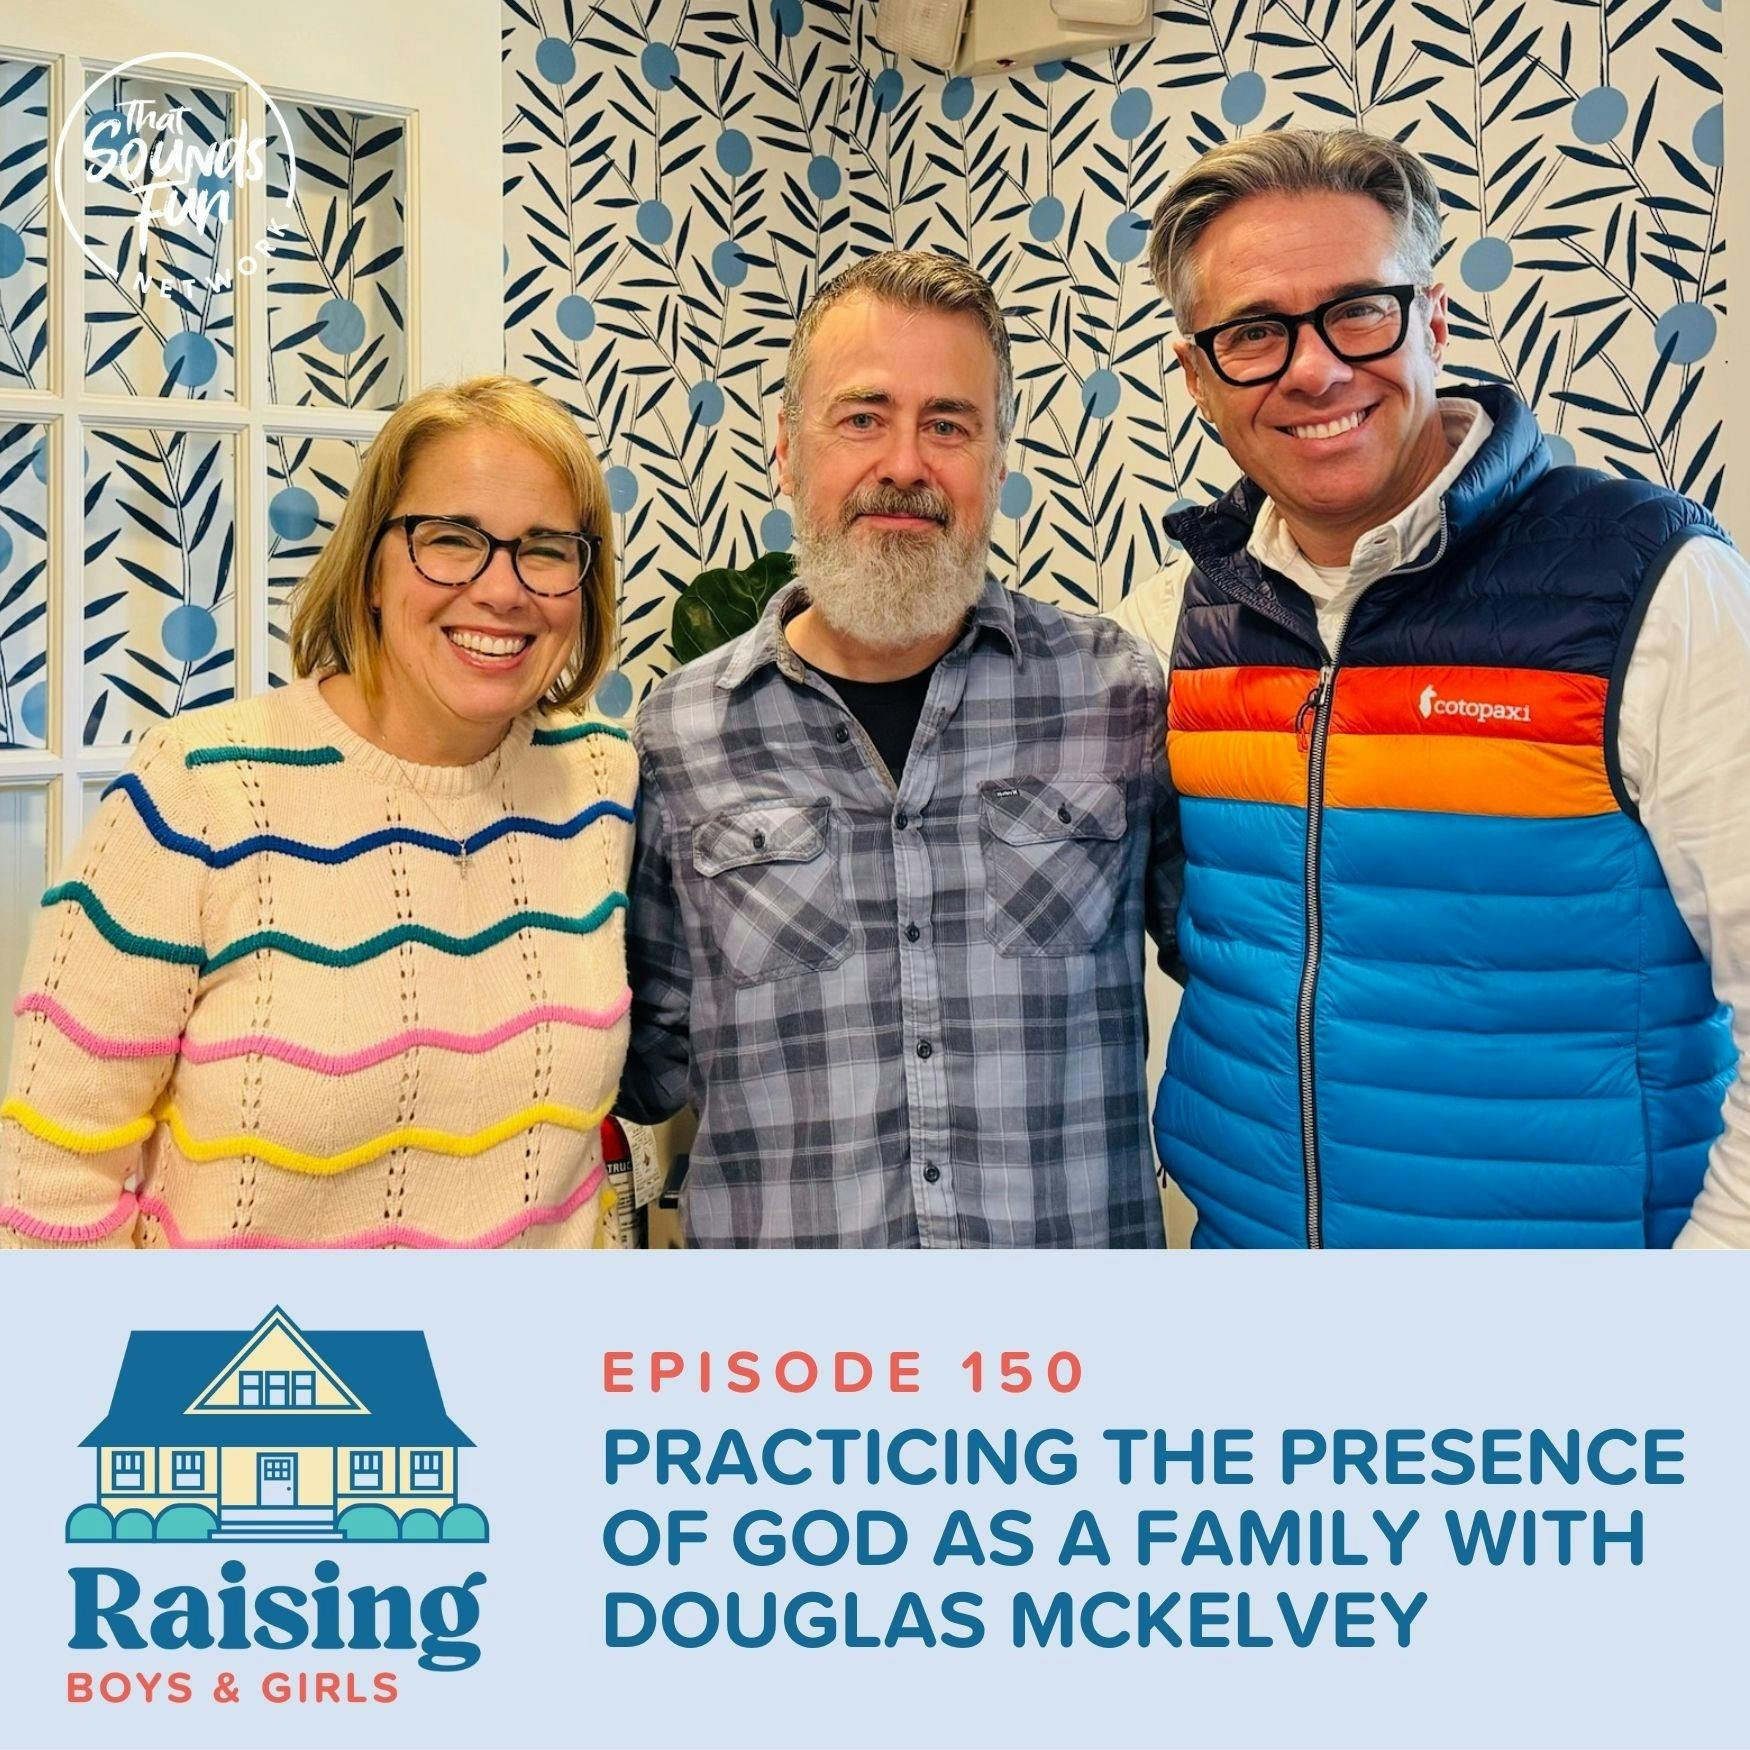 Episode 150: Practicing the Presence of God as a Family with Douglas McKelvey